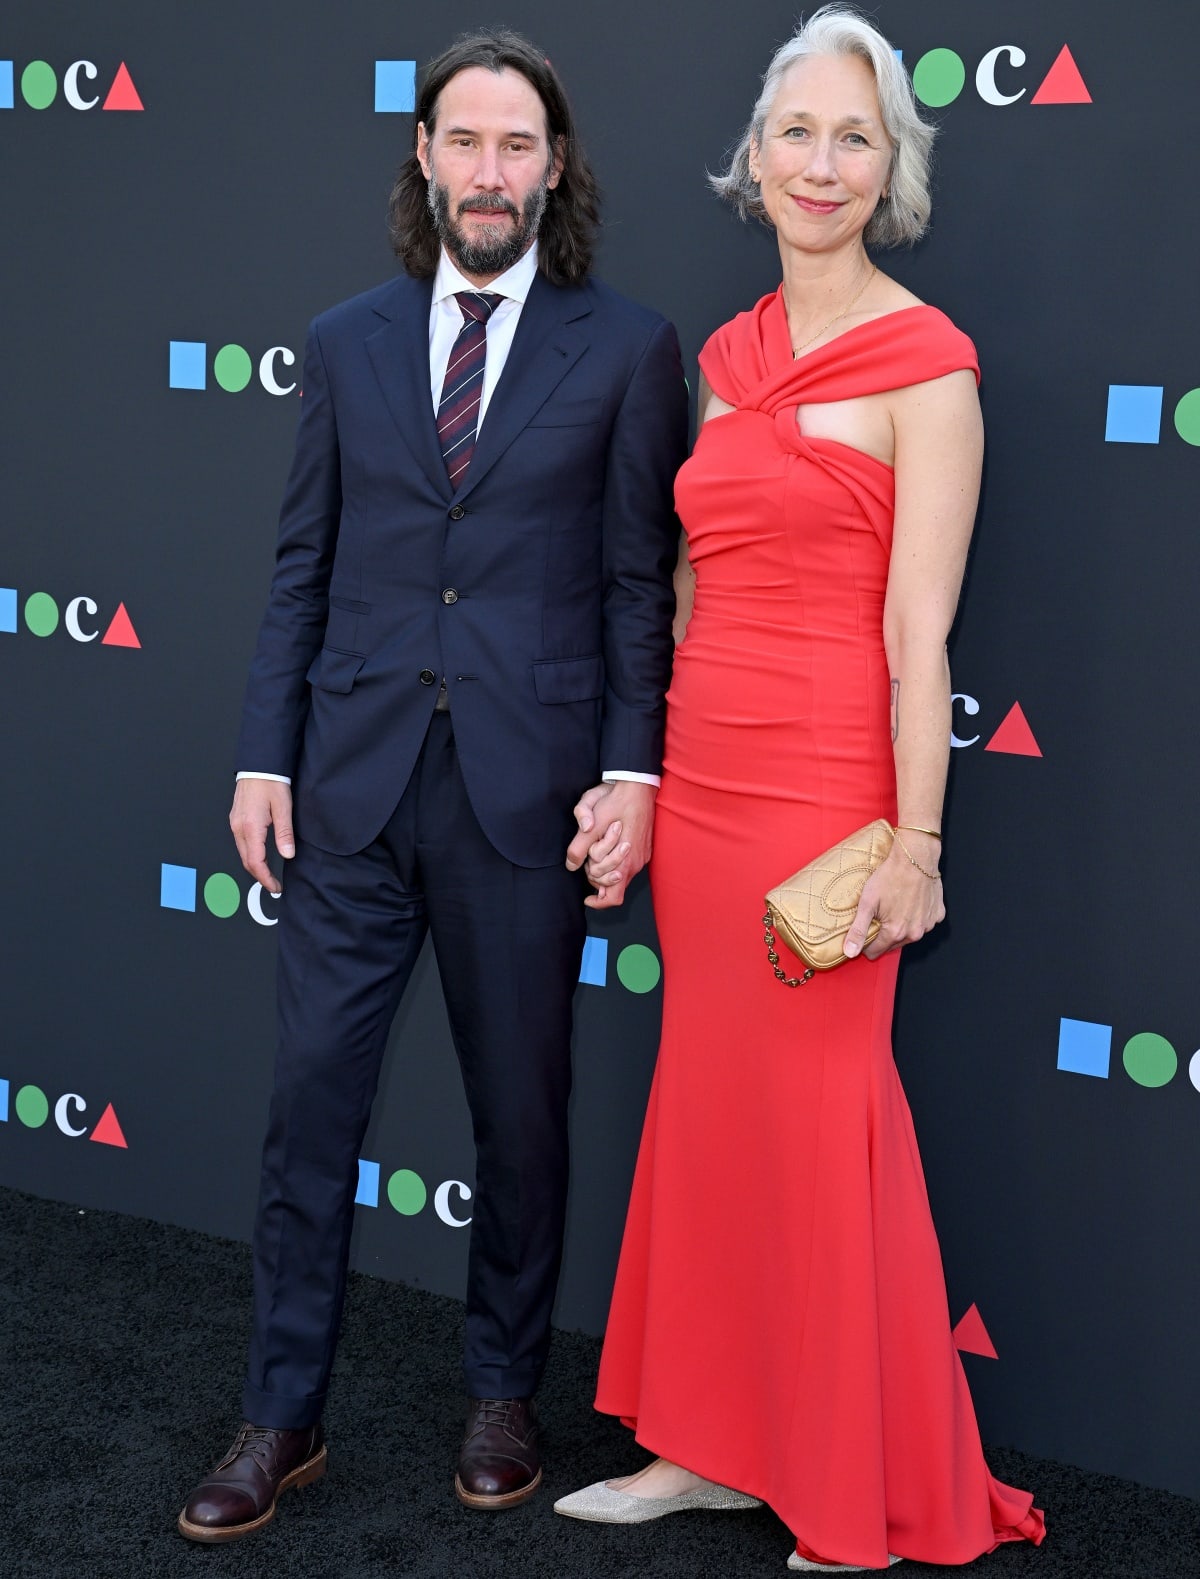 Keanu Reeves and Alexandra Grant were last seen together publicly at the 2022 MOCA Gala